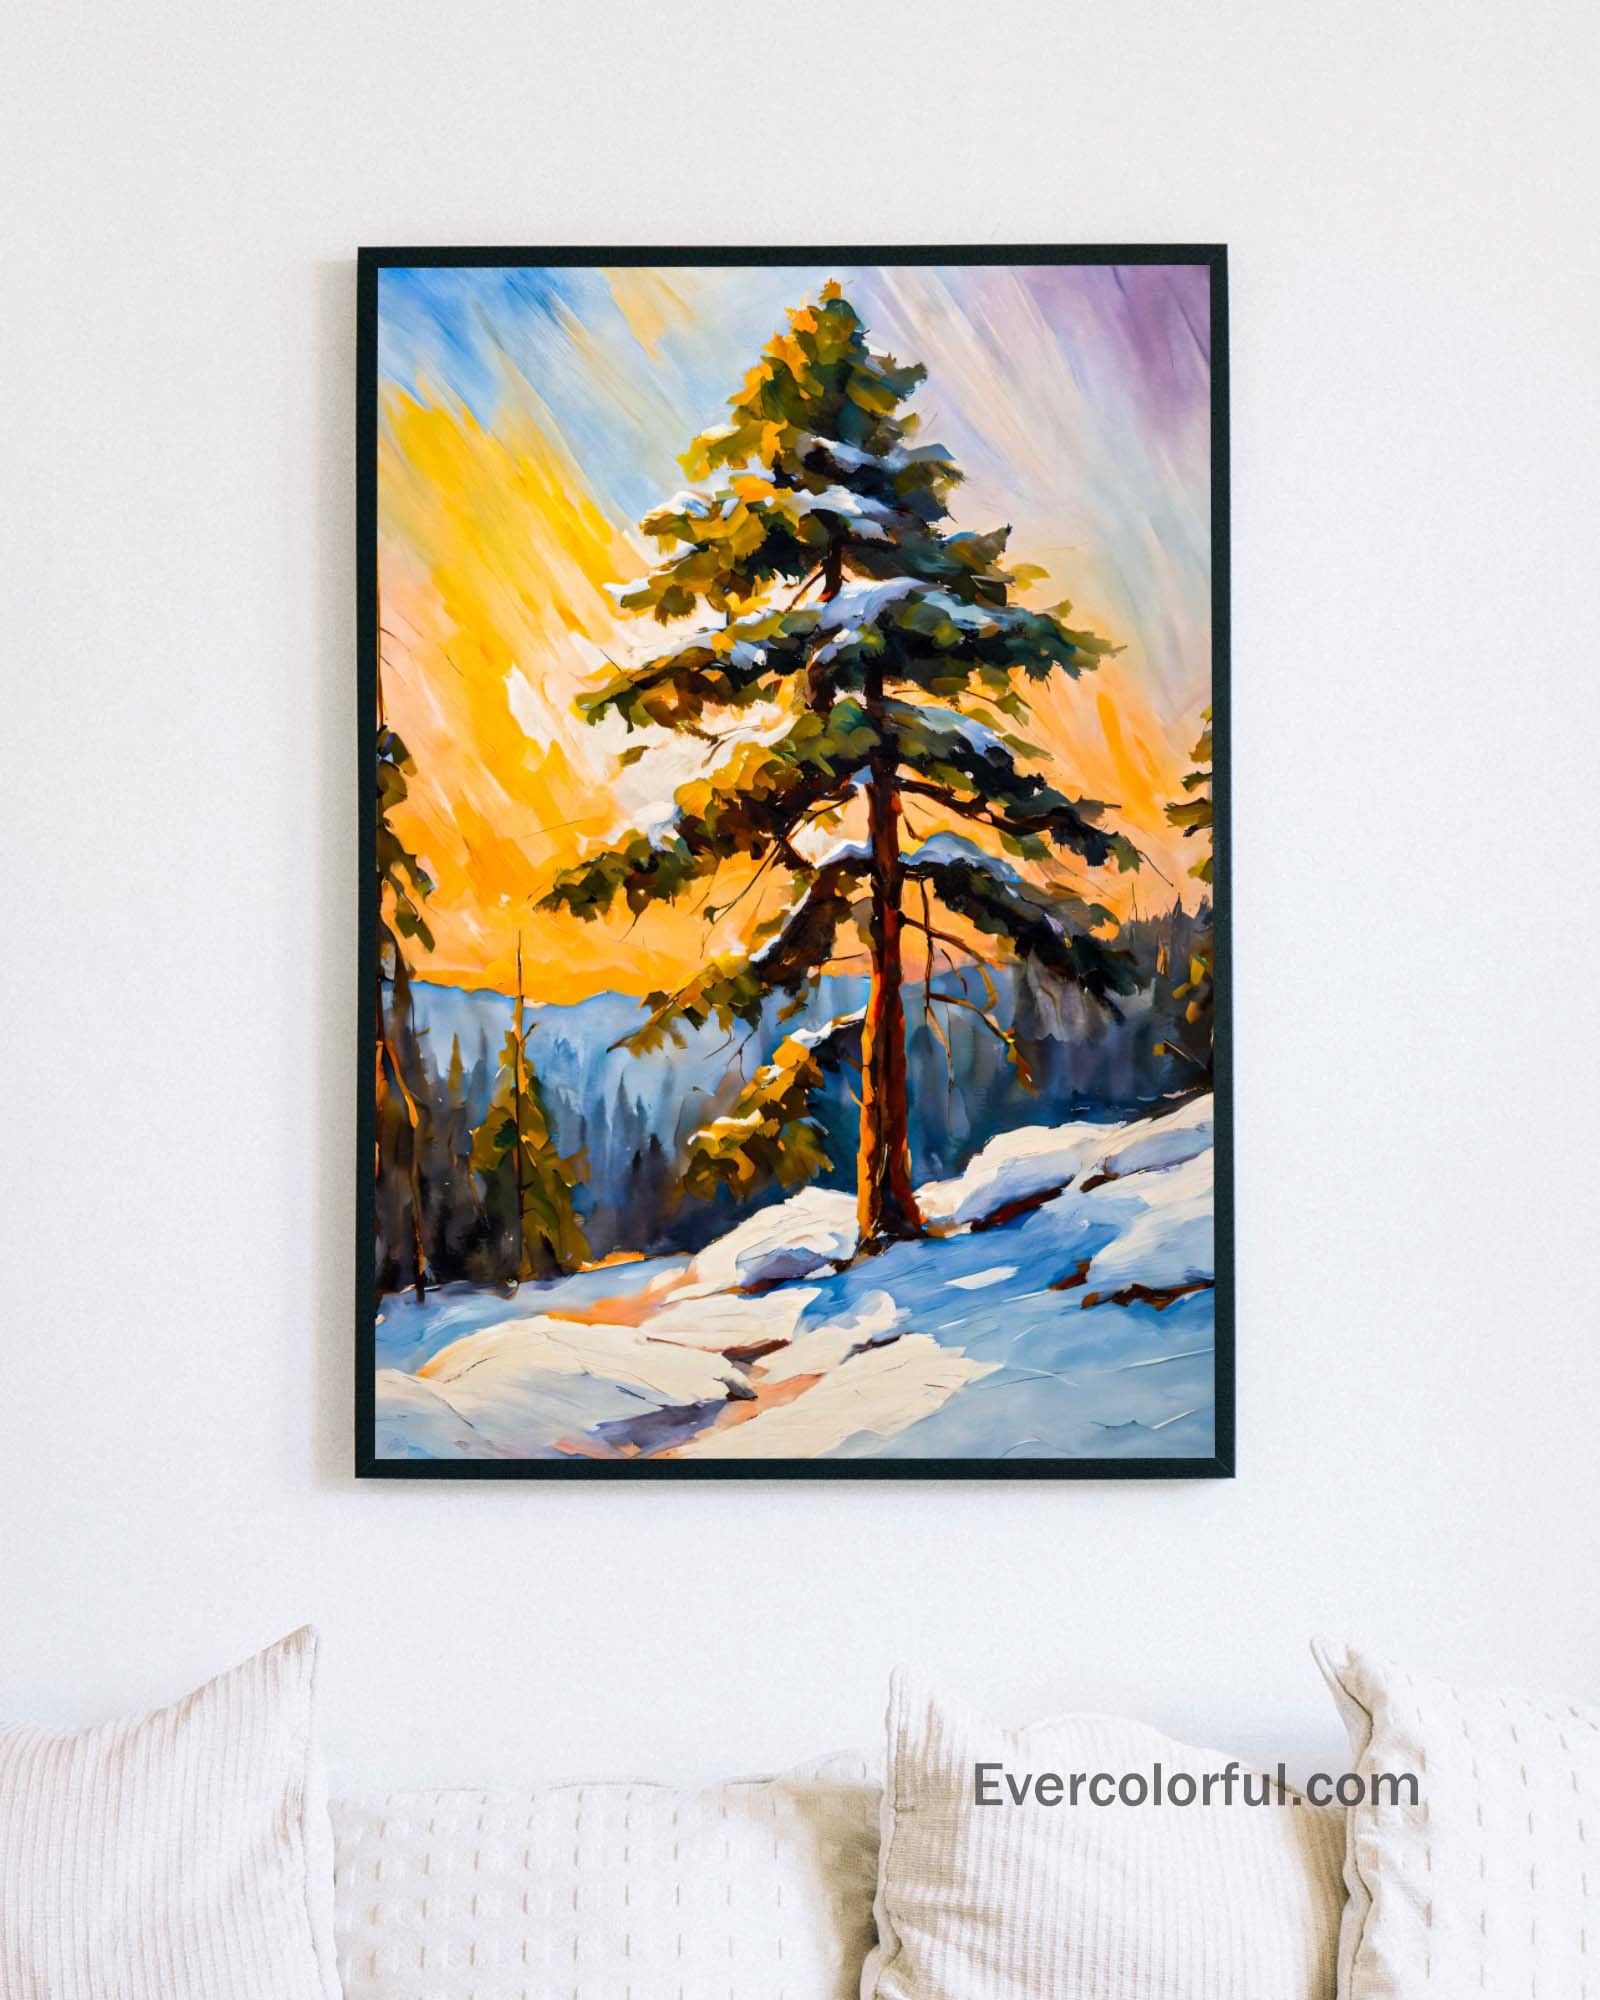 Sorrowful tree - Poster - Ever colorful